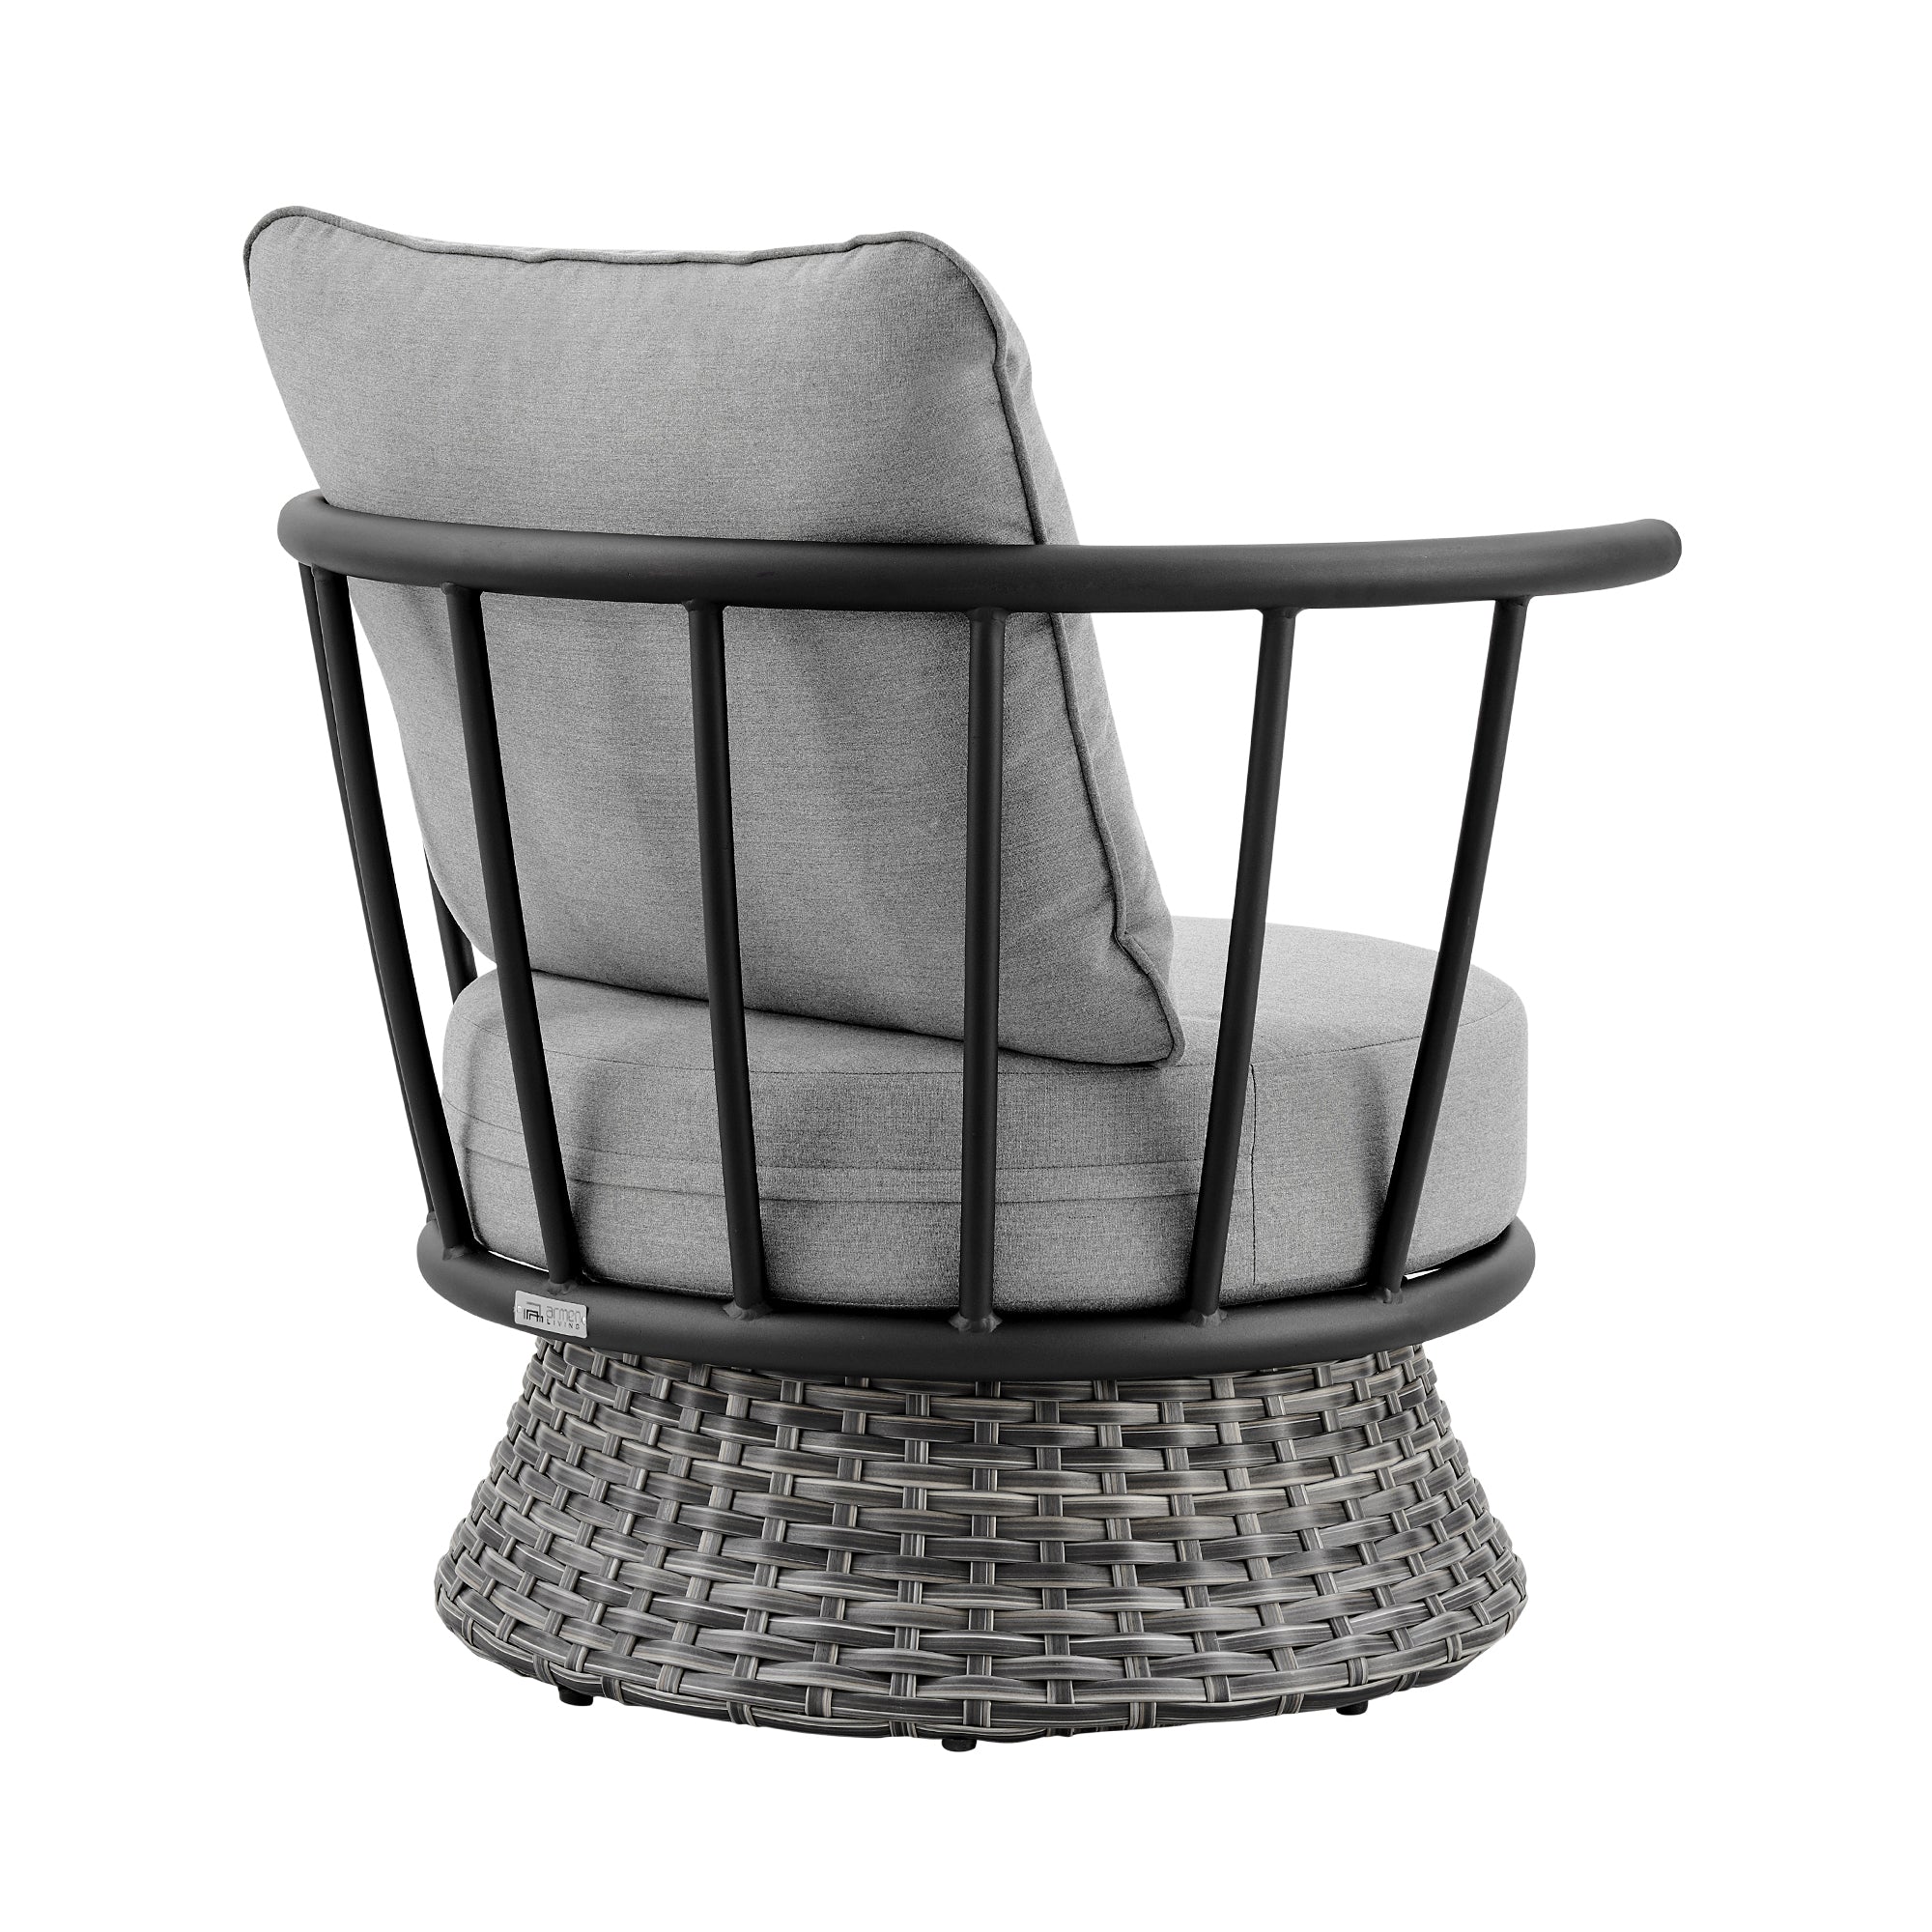 Armen Living - Monk 4 Piece Outdoor Patio Furniture Set in Black Aluminum and Grey Wicker with Grey Cushions - 840254332478